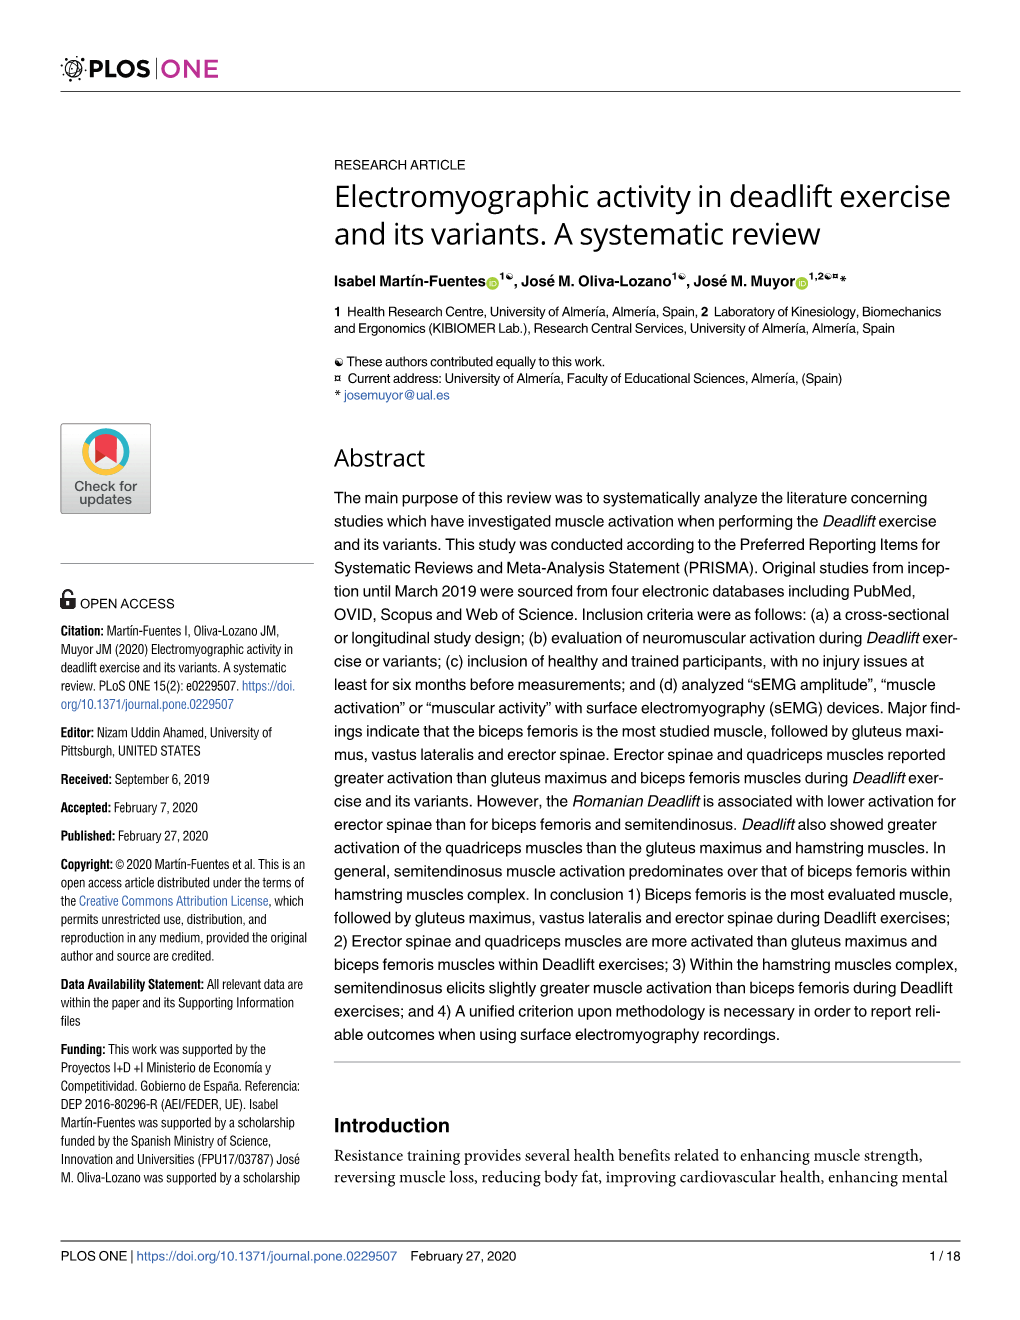 Electromyographic Activity in Deadlift Exercise and Its Variants. a Systematic Review